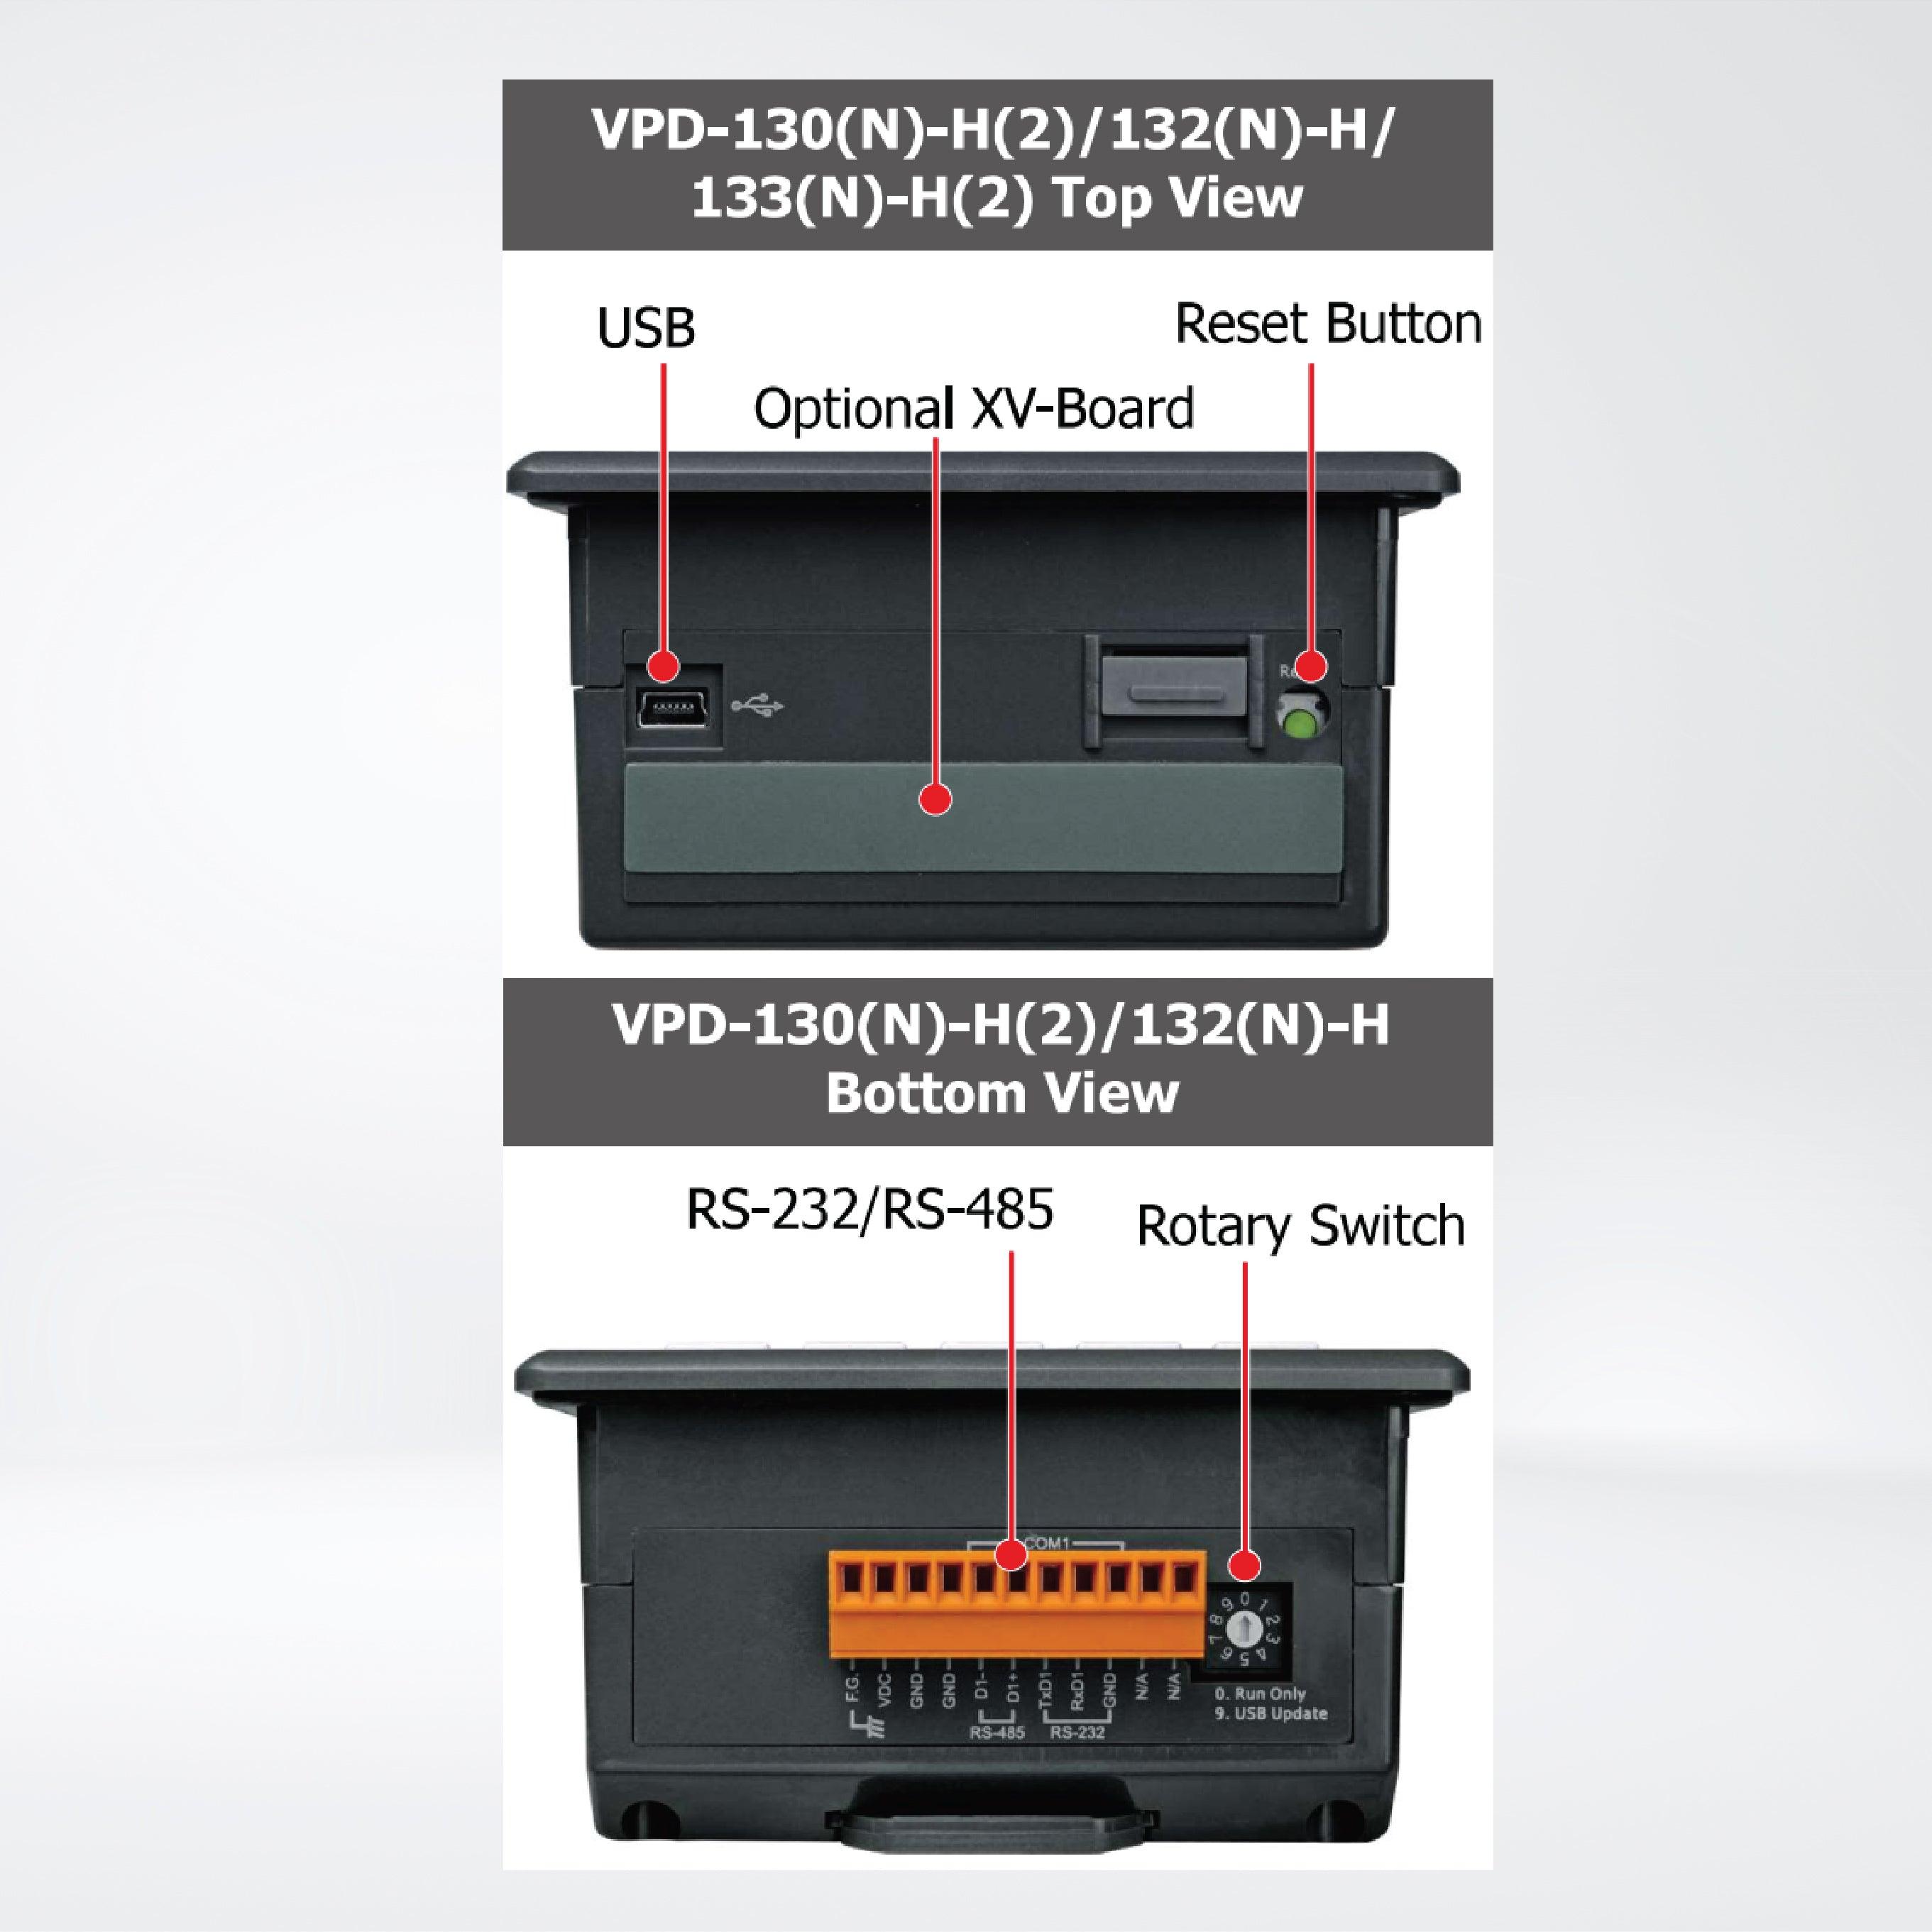 VPD-130-H 3.5" Touch HMI Device with 1 x RS-232/RS-485 and Rubber Keypad - Riverplus